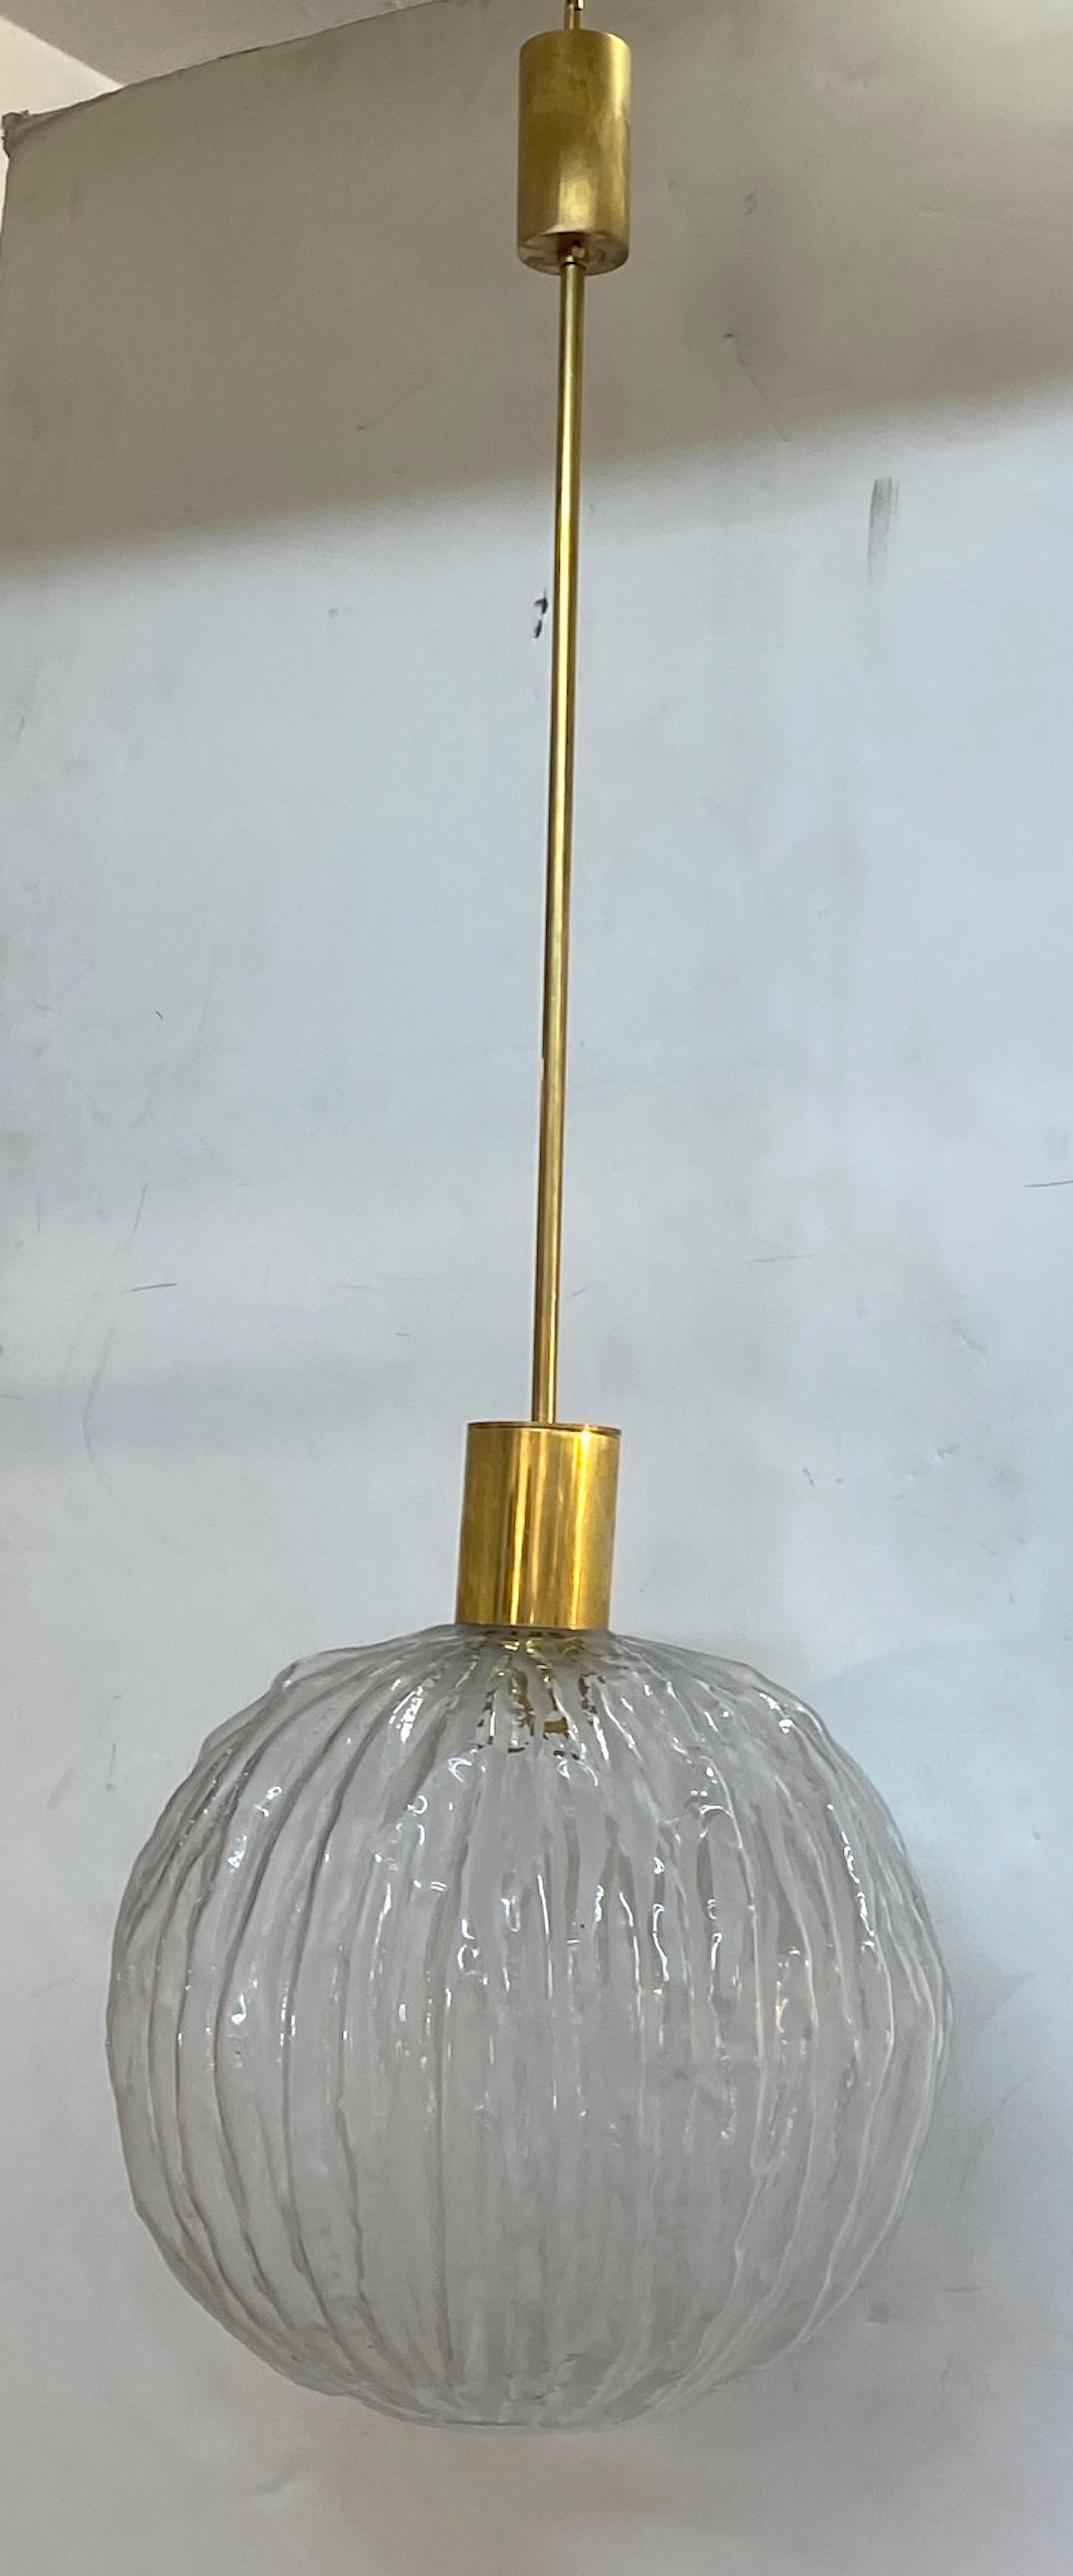 Shown are two of five available Italian 1960s pendant lights by designer Angelo Brotto. Each pendant is comprised of a brass rod with original ceiling canopy at the top. At the bottom is a machine socket cover that supports the molded glass globe